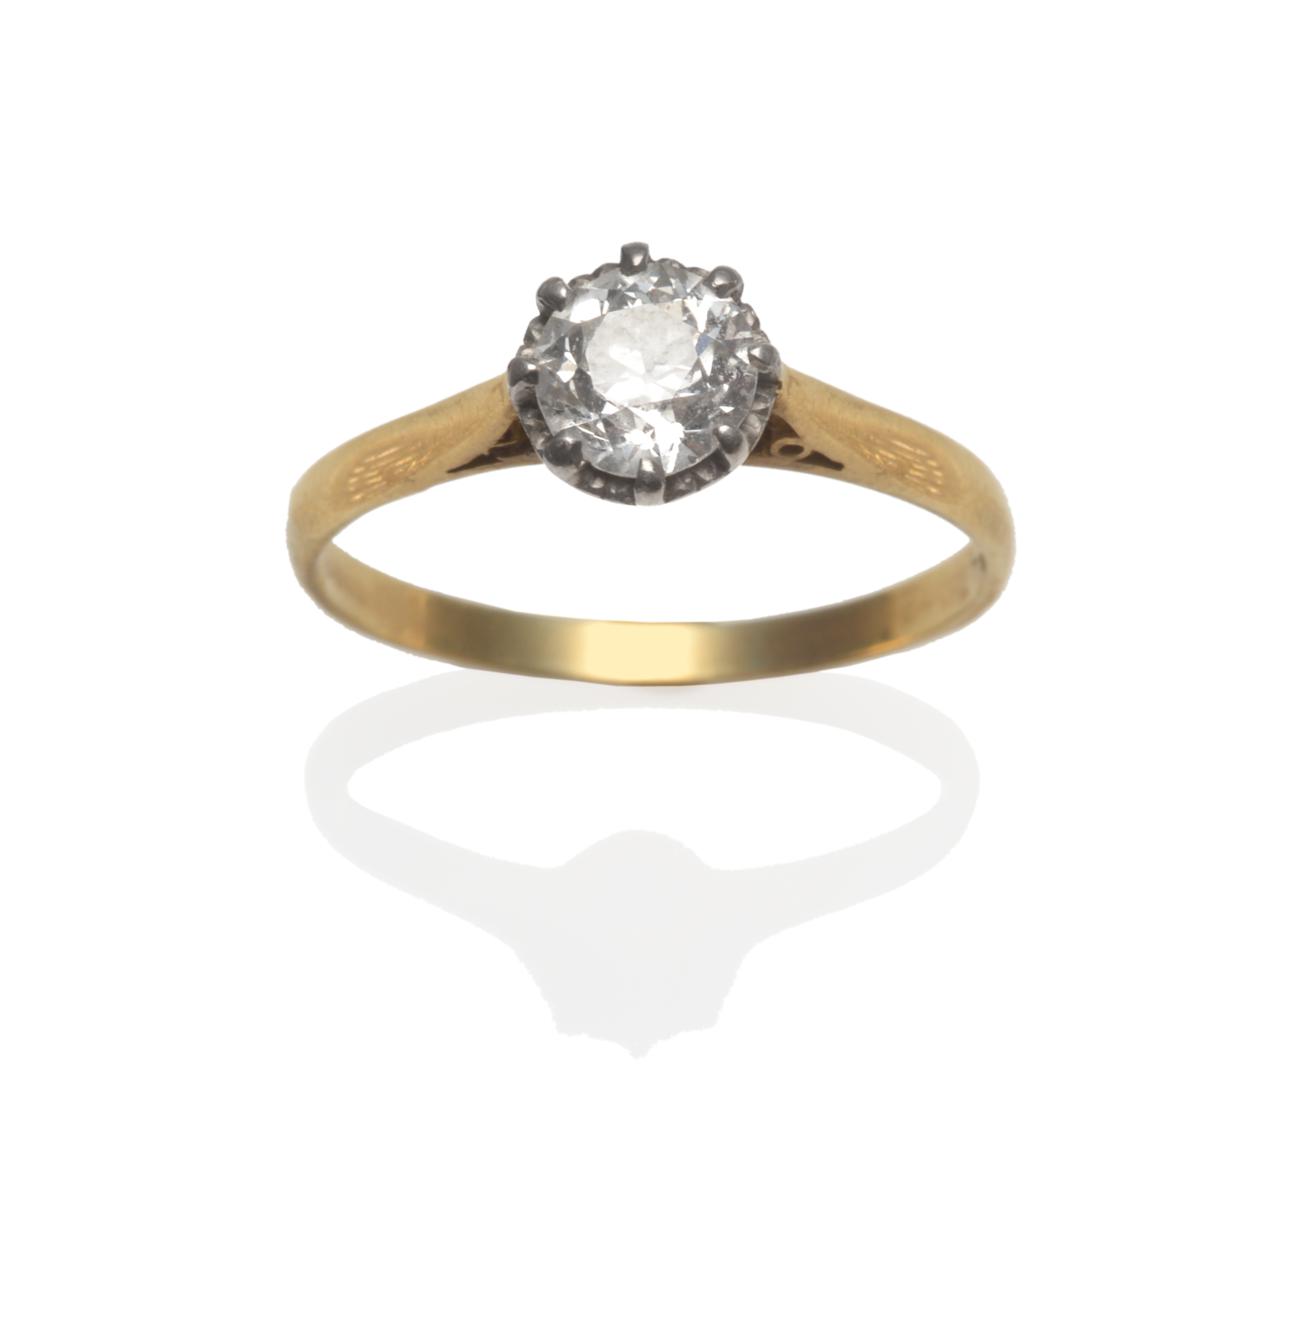 Lot 214 - A Diamond Solitaire Ring, an old cut diamond in a white claw and collet setting on a yellow tapered